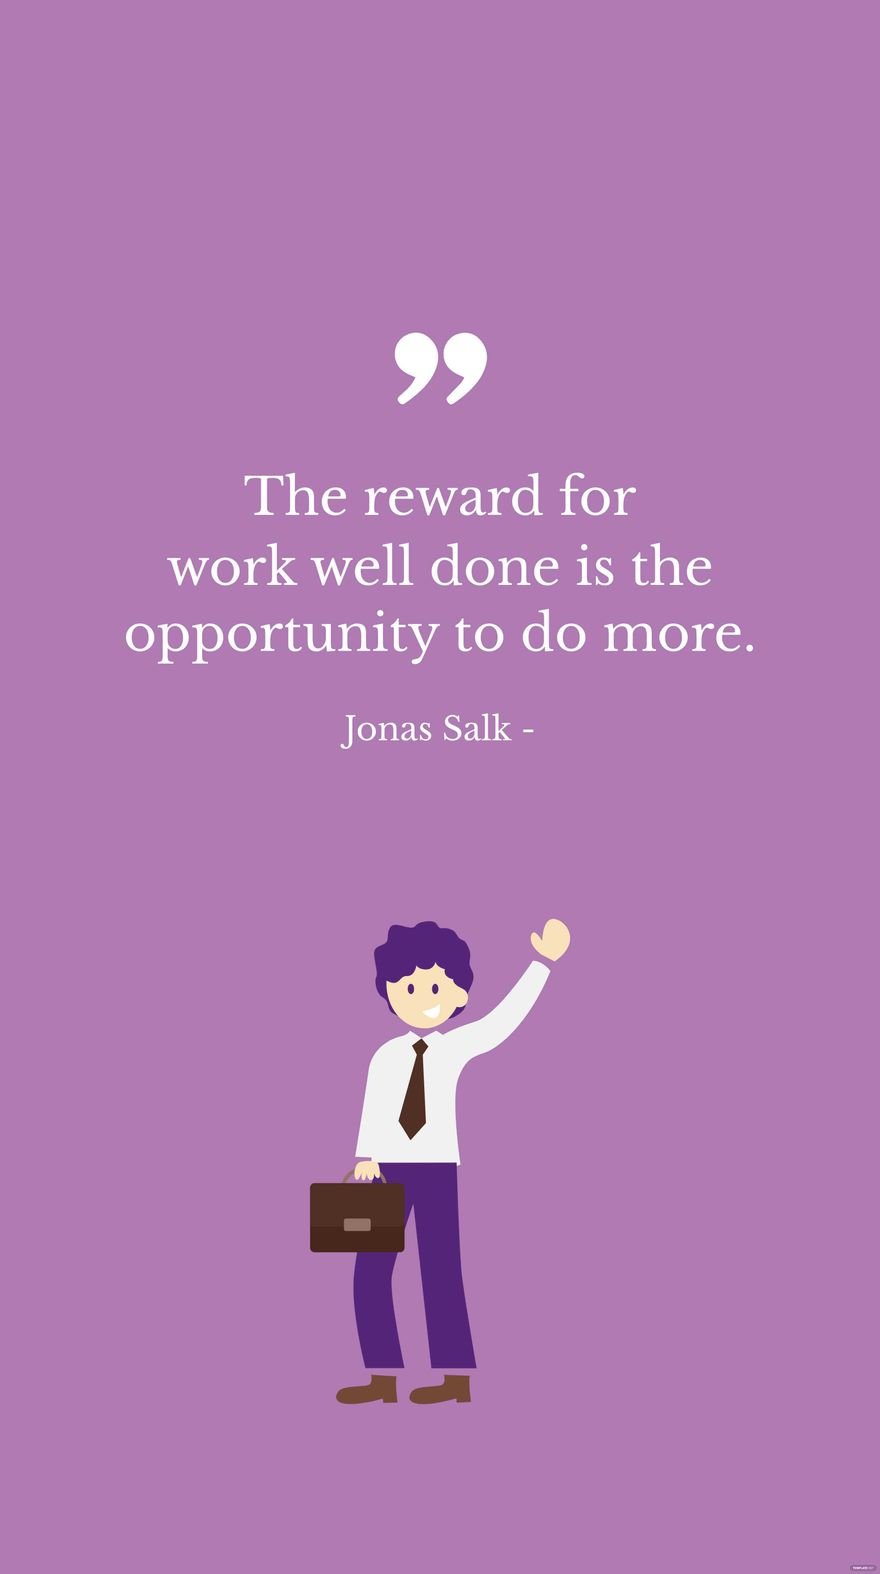 Free Jonas Salk - The reward for work well done is the opportunity to do more. in JPG